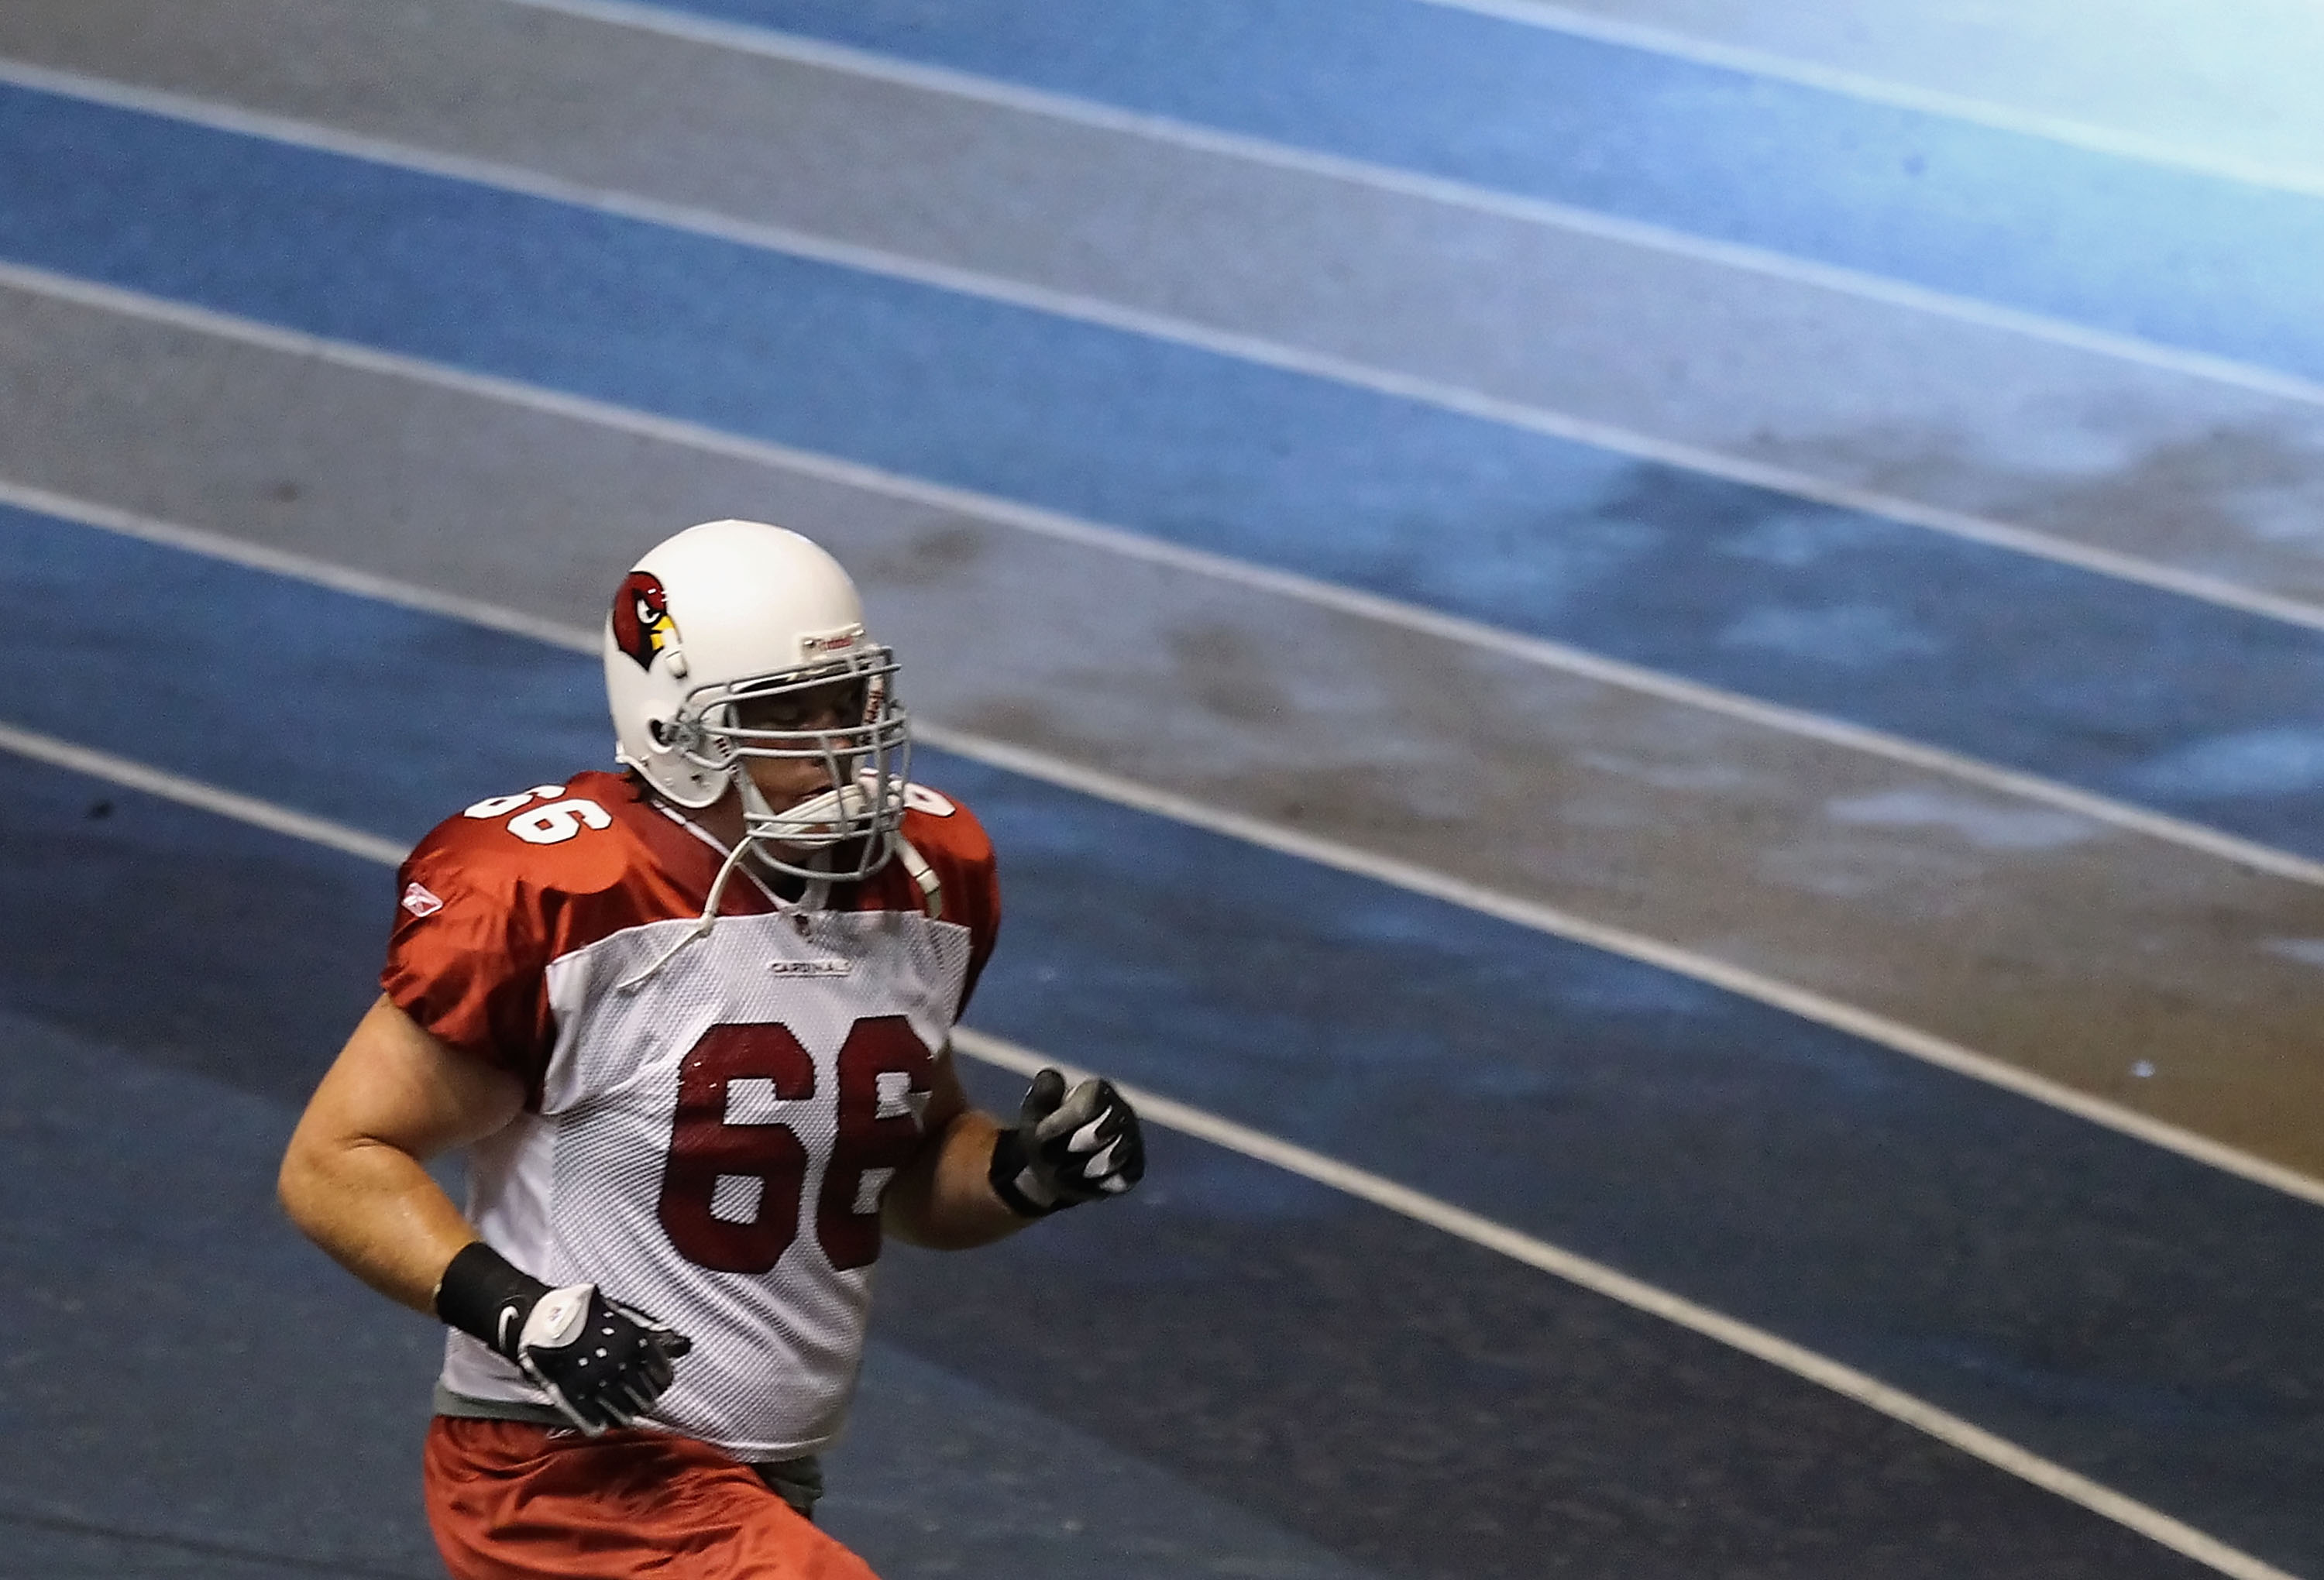 FLAGSTAFF, AZ - AUGUST 01:  Guard Alan Faneca #66 of the Arizona Cardinals practices in training camp at Northern Arizona University Walkup Skydome on August 1, 2010 in Flagstaff, Arizona.  (Photo by Christian Petersen/Getty Images)